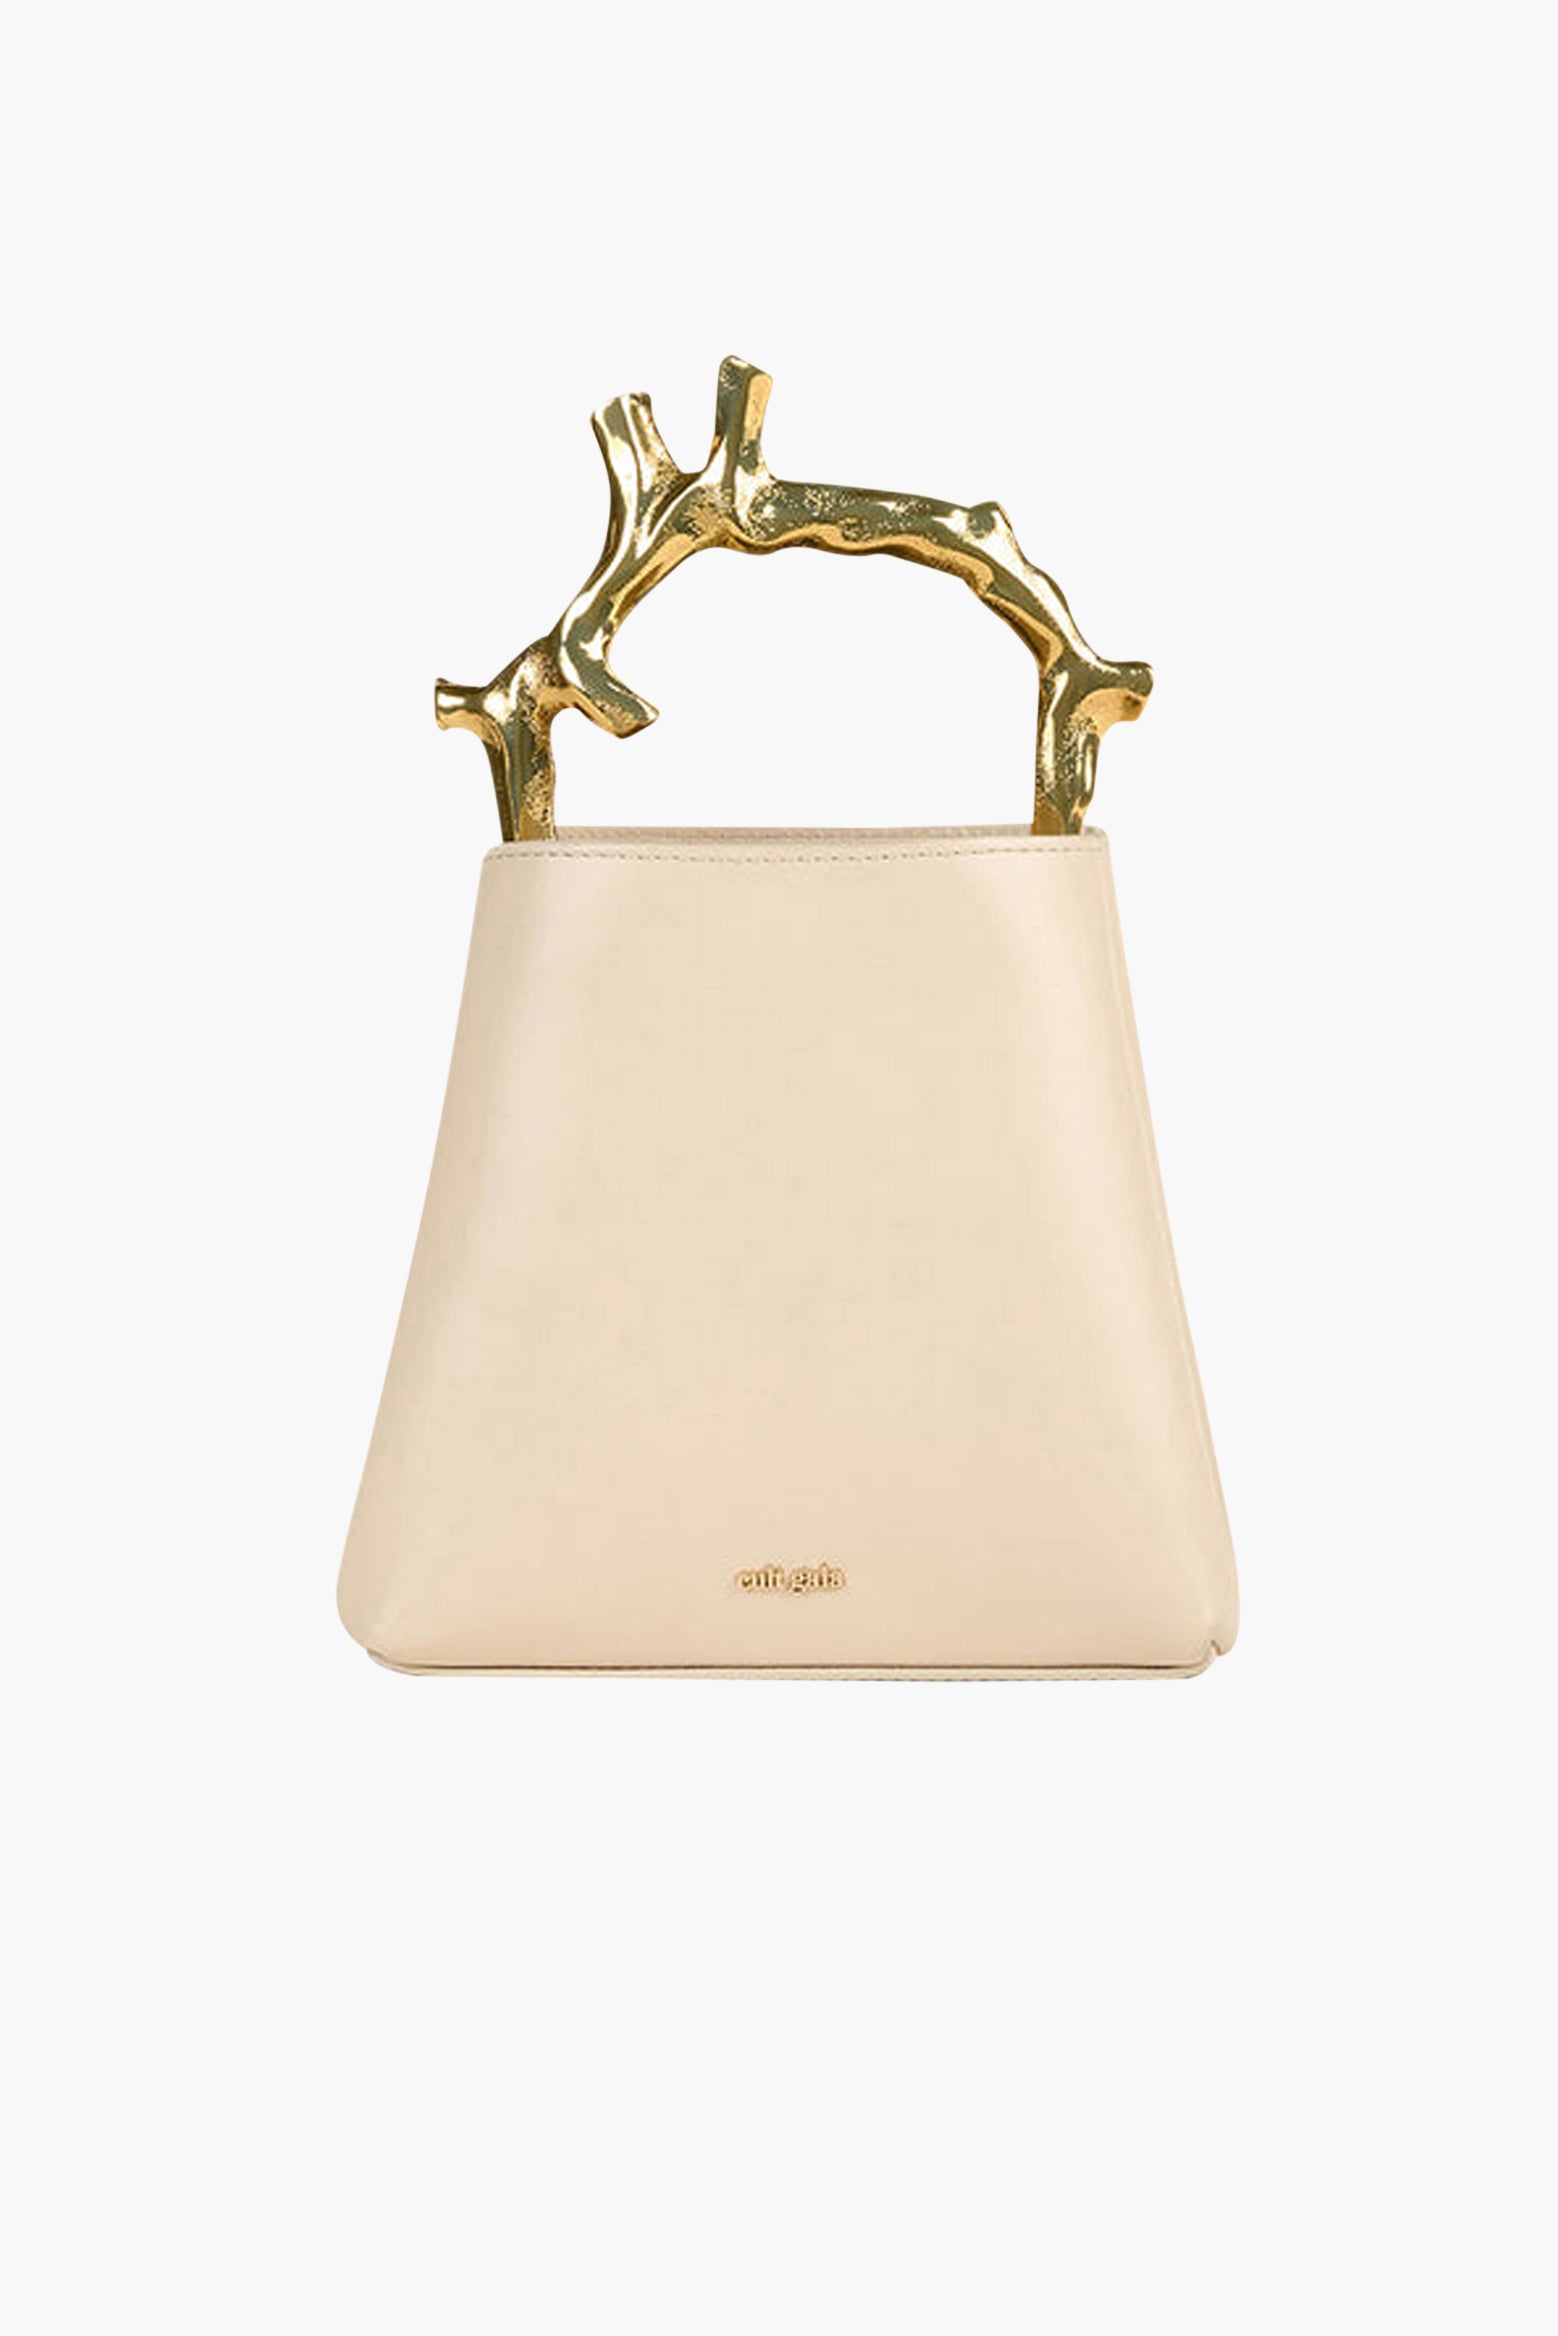 Cult Gaia Noemi Top Handle in Off-White available at TNT The New Trend Australia.